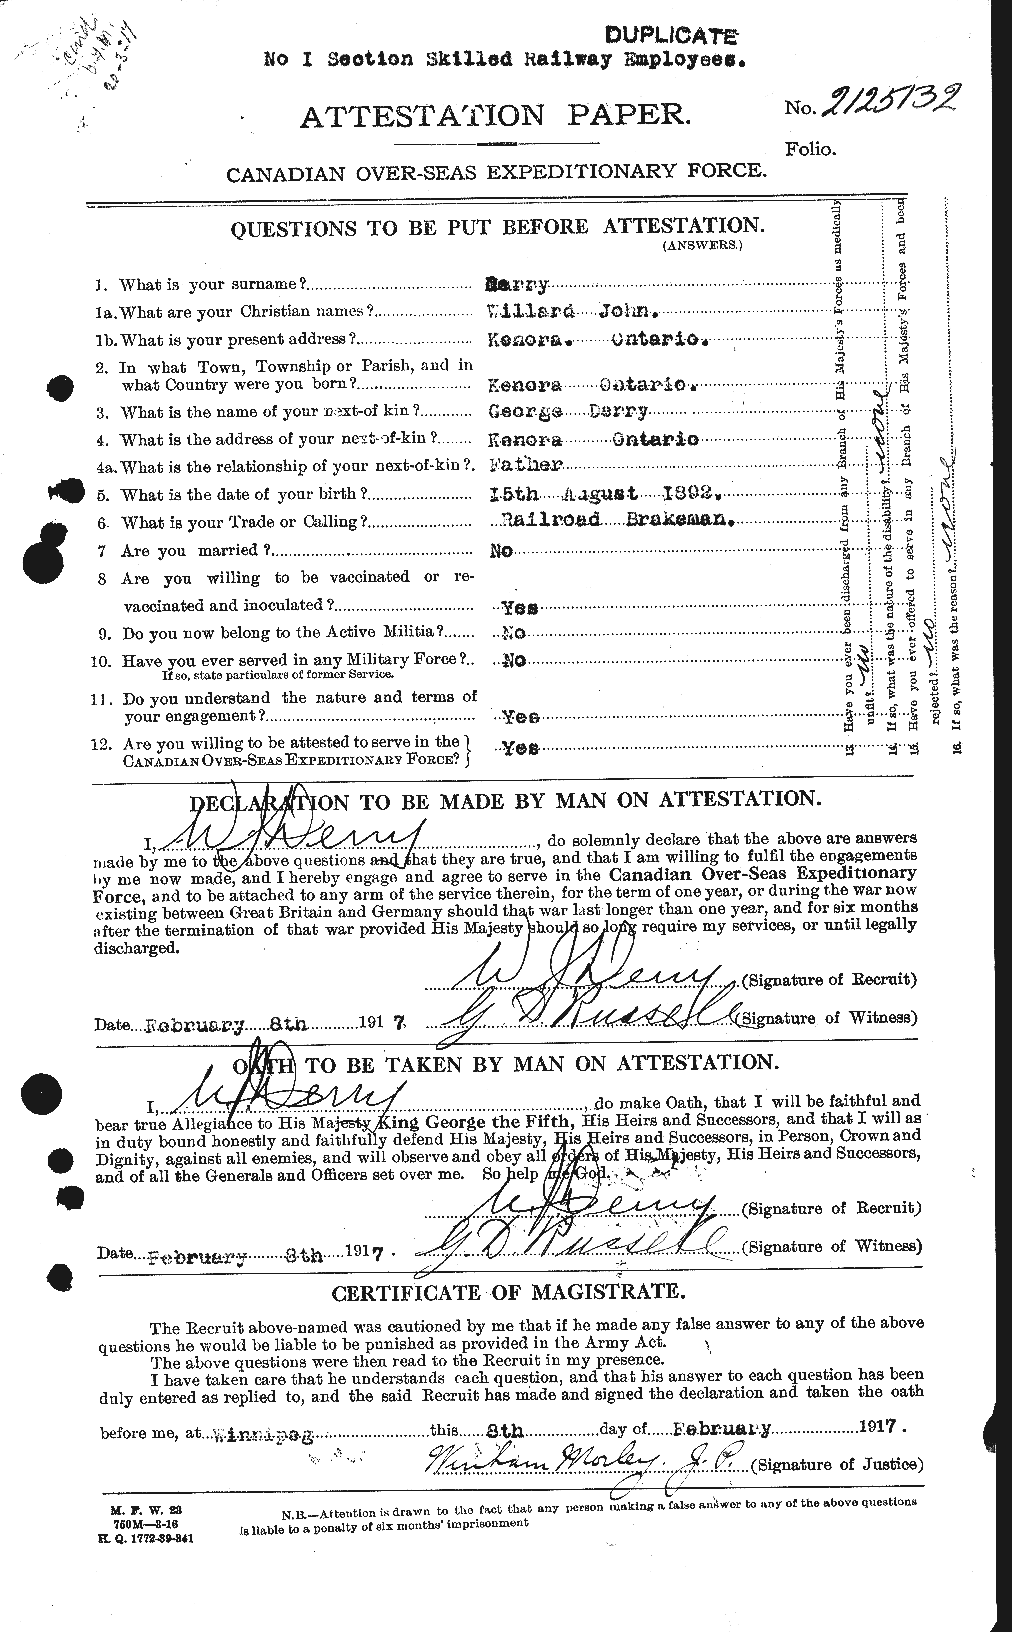 Personnel Records of the First World War - CEF 290368a